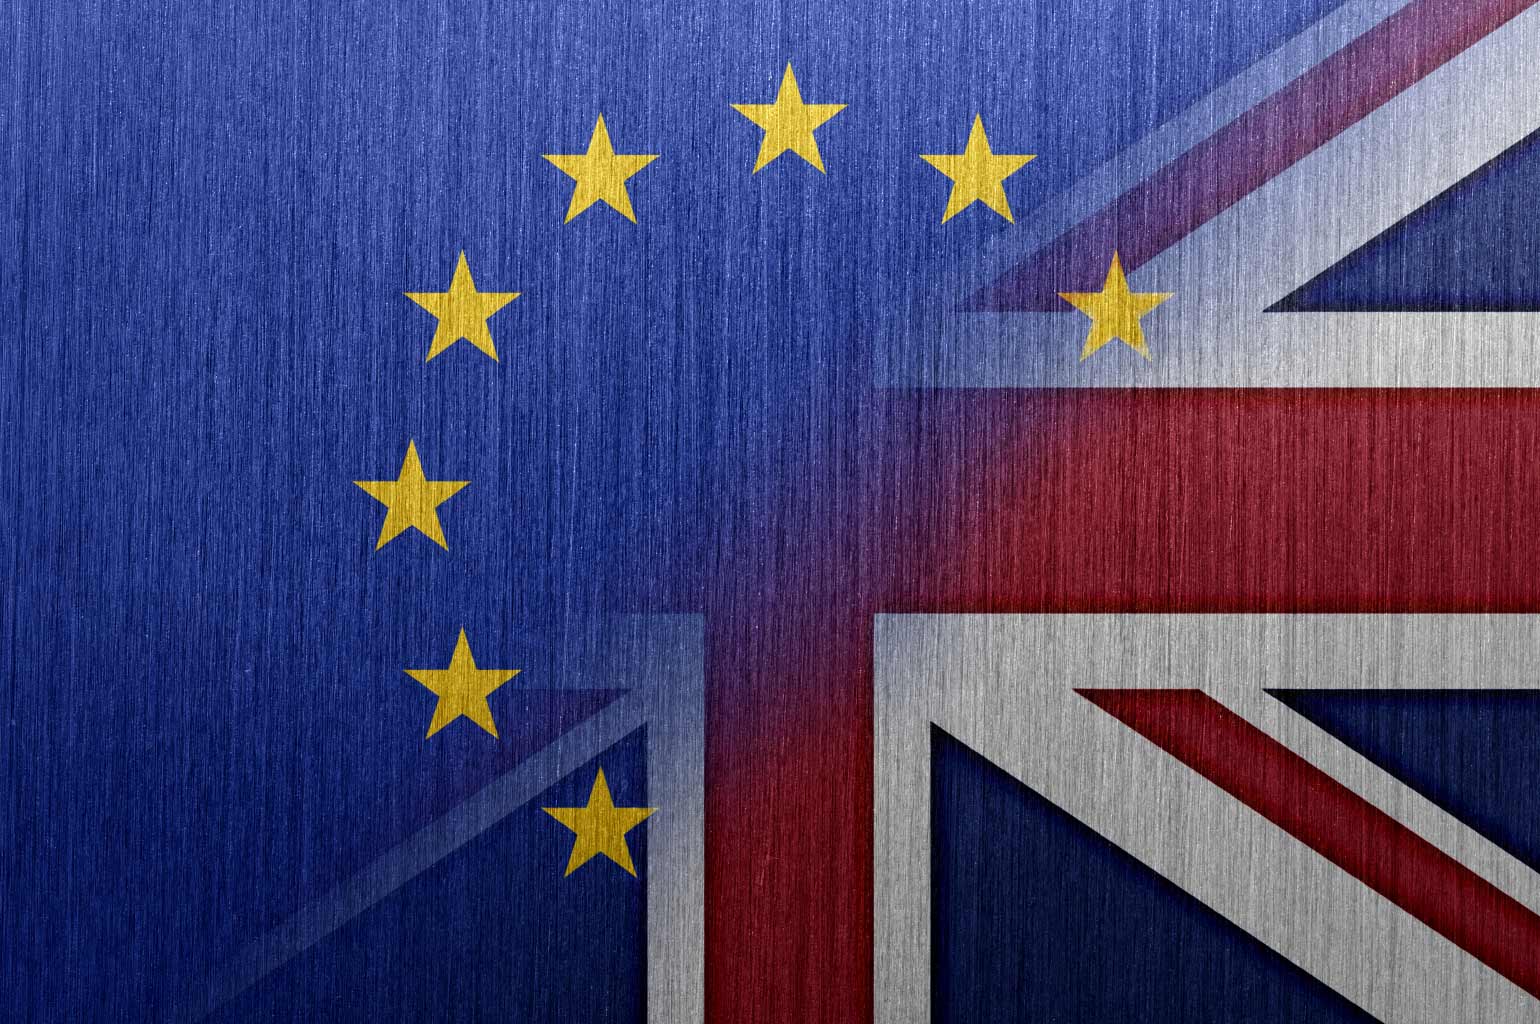 British music industry talks on post-Brexit plans and music landscape